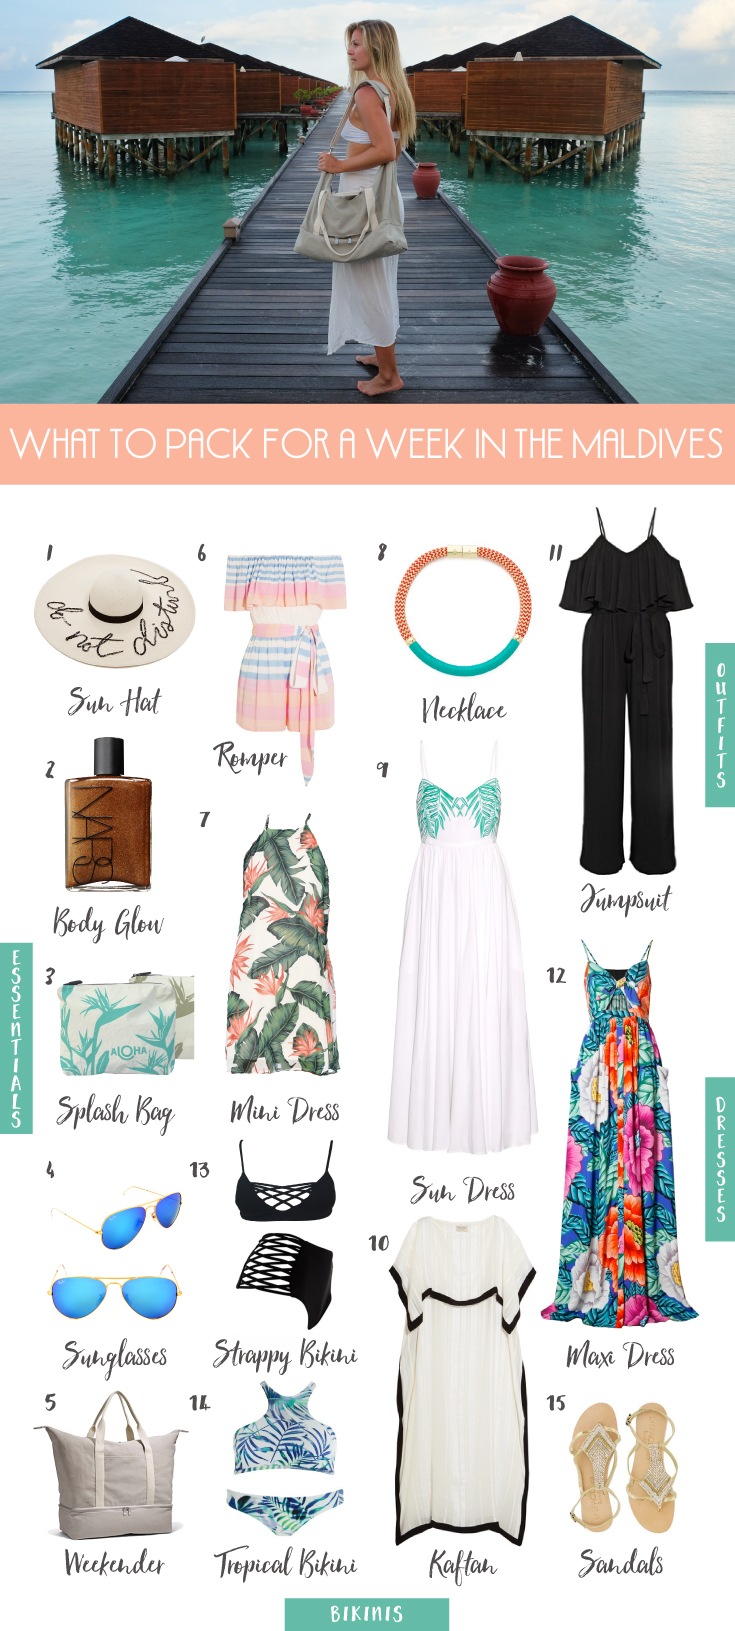 What to Pack for a Week in The Maldives